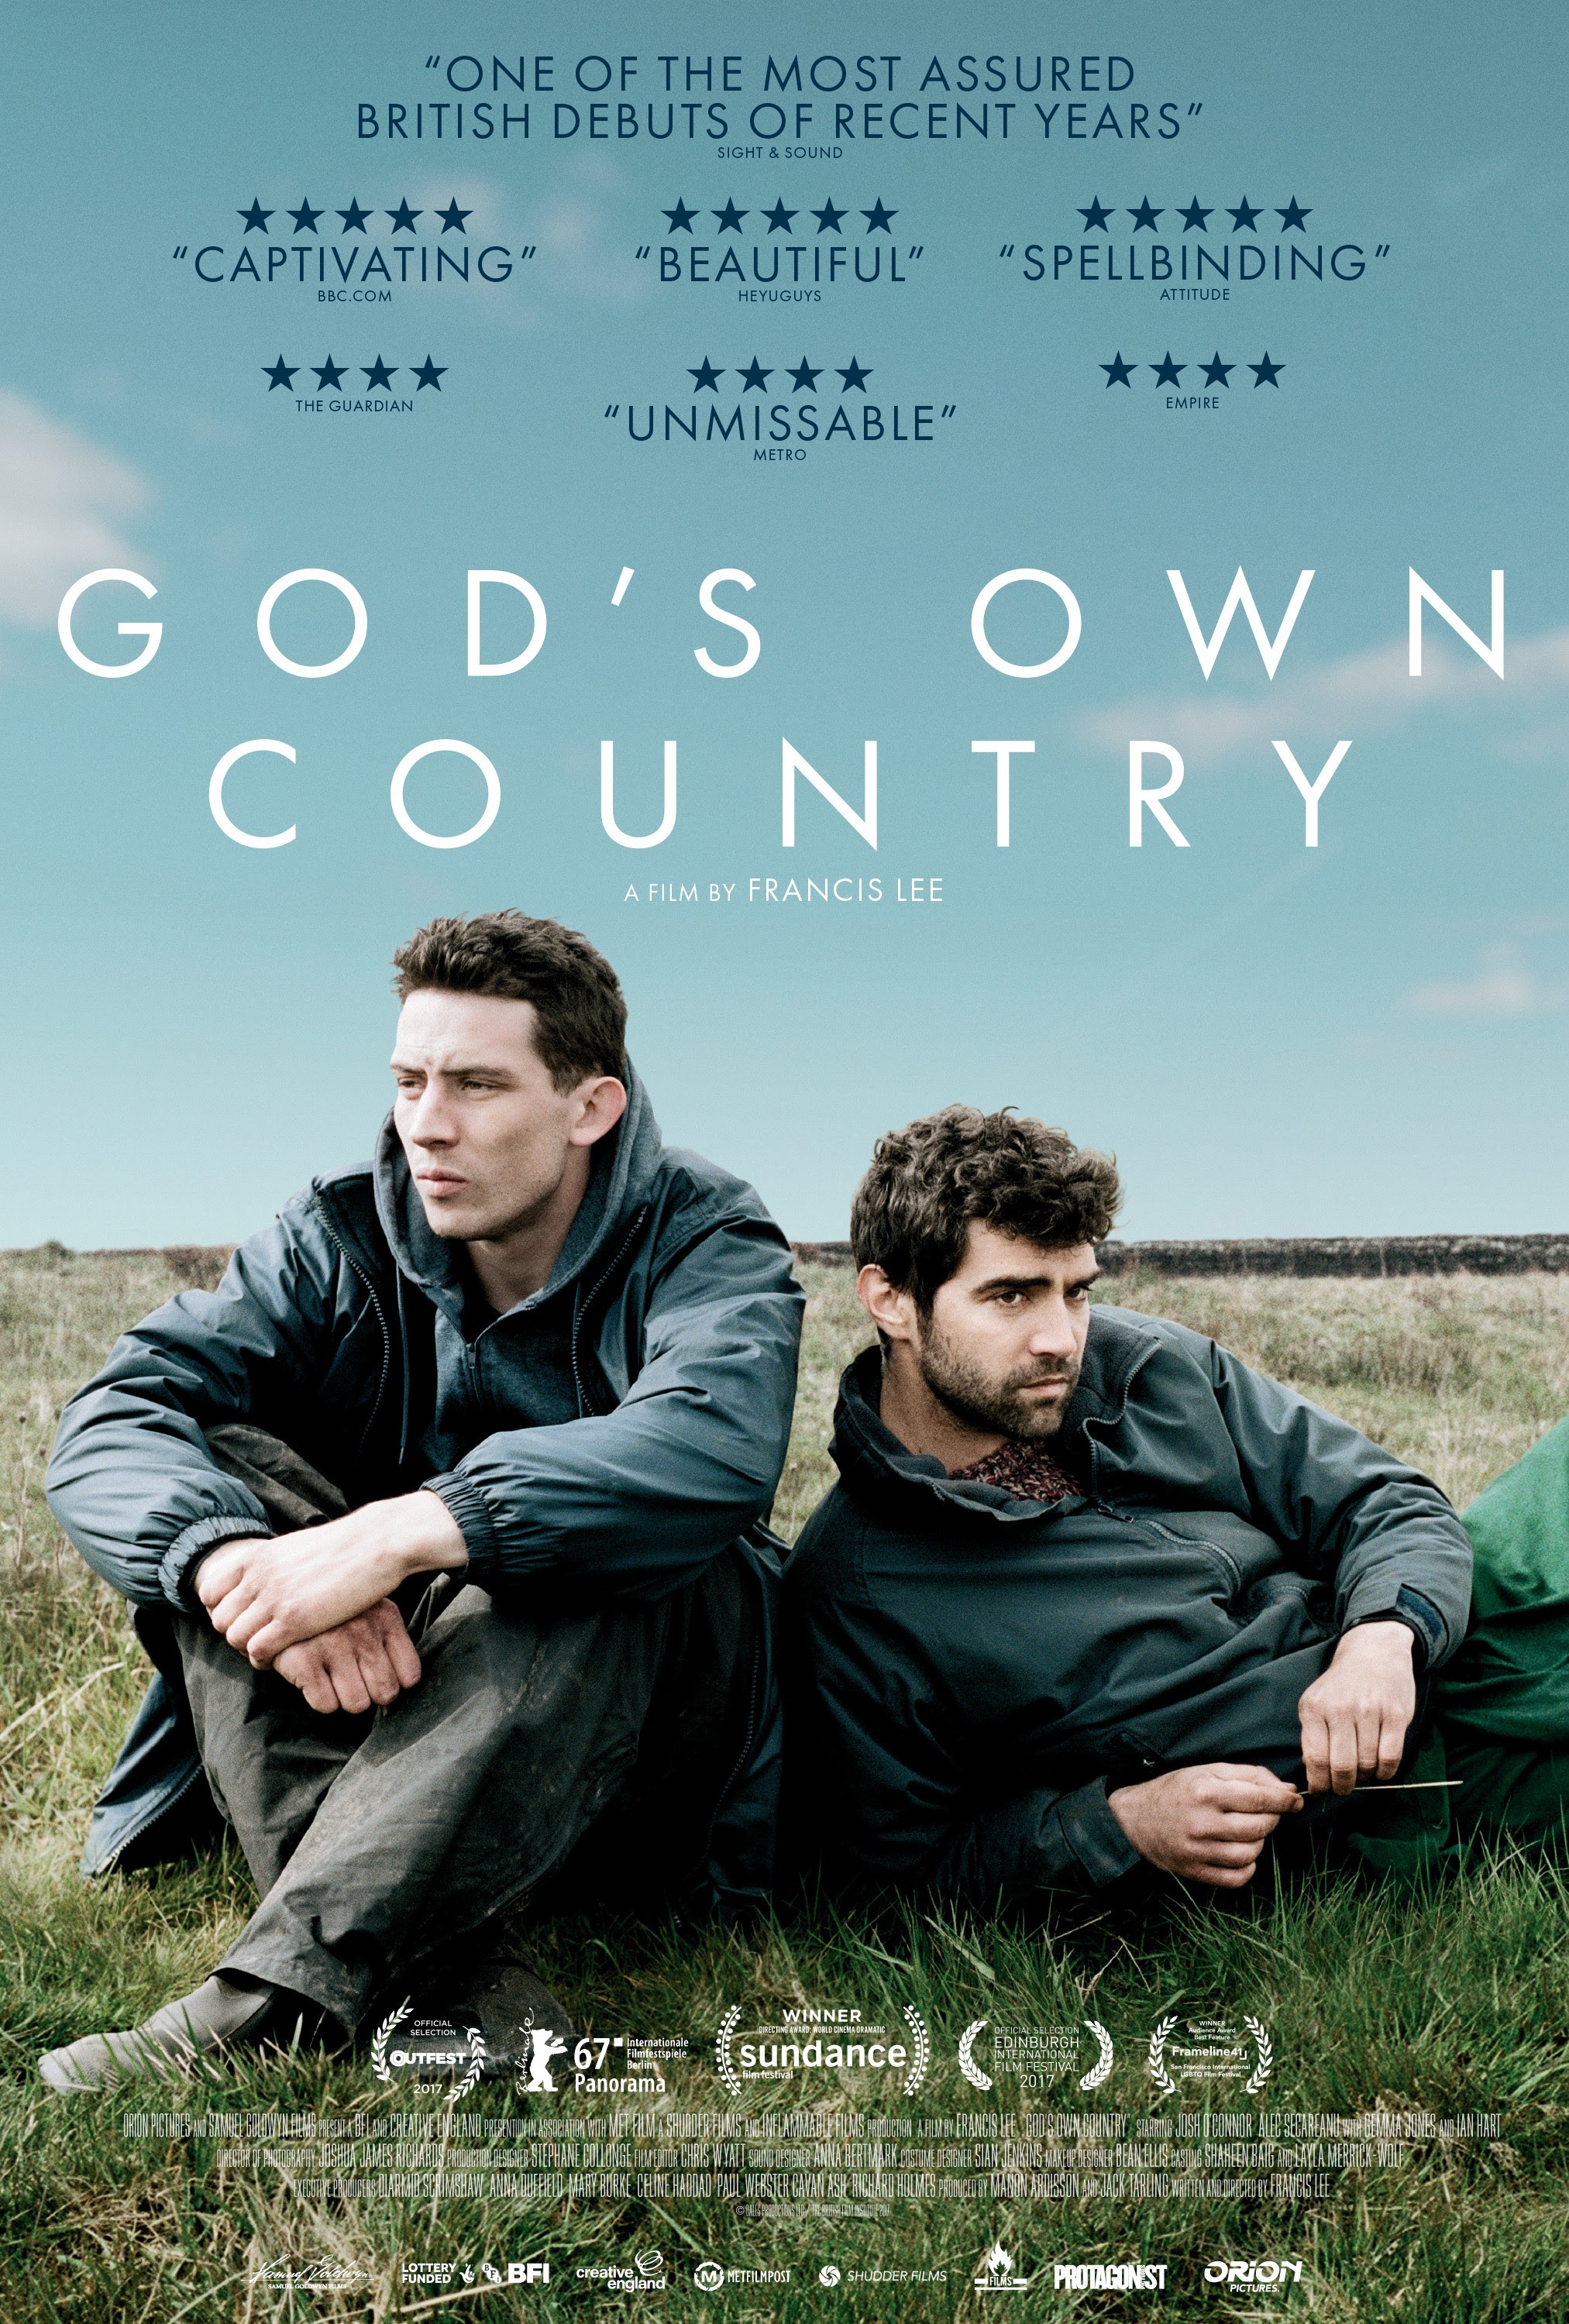 God's Own Country Movie Reviews